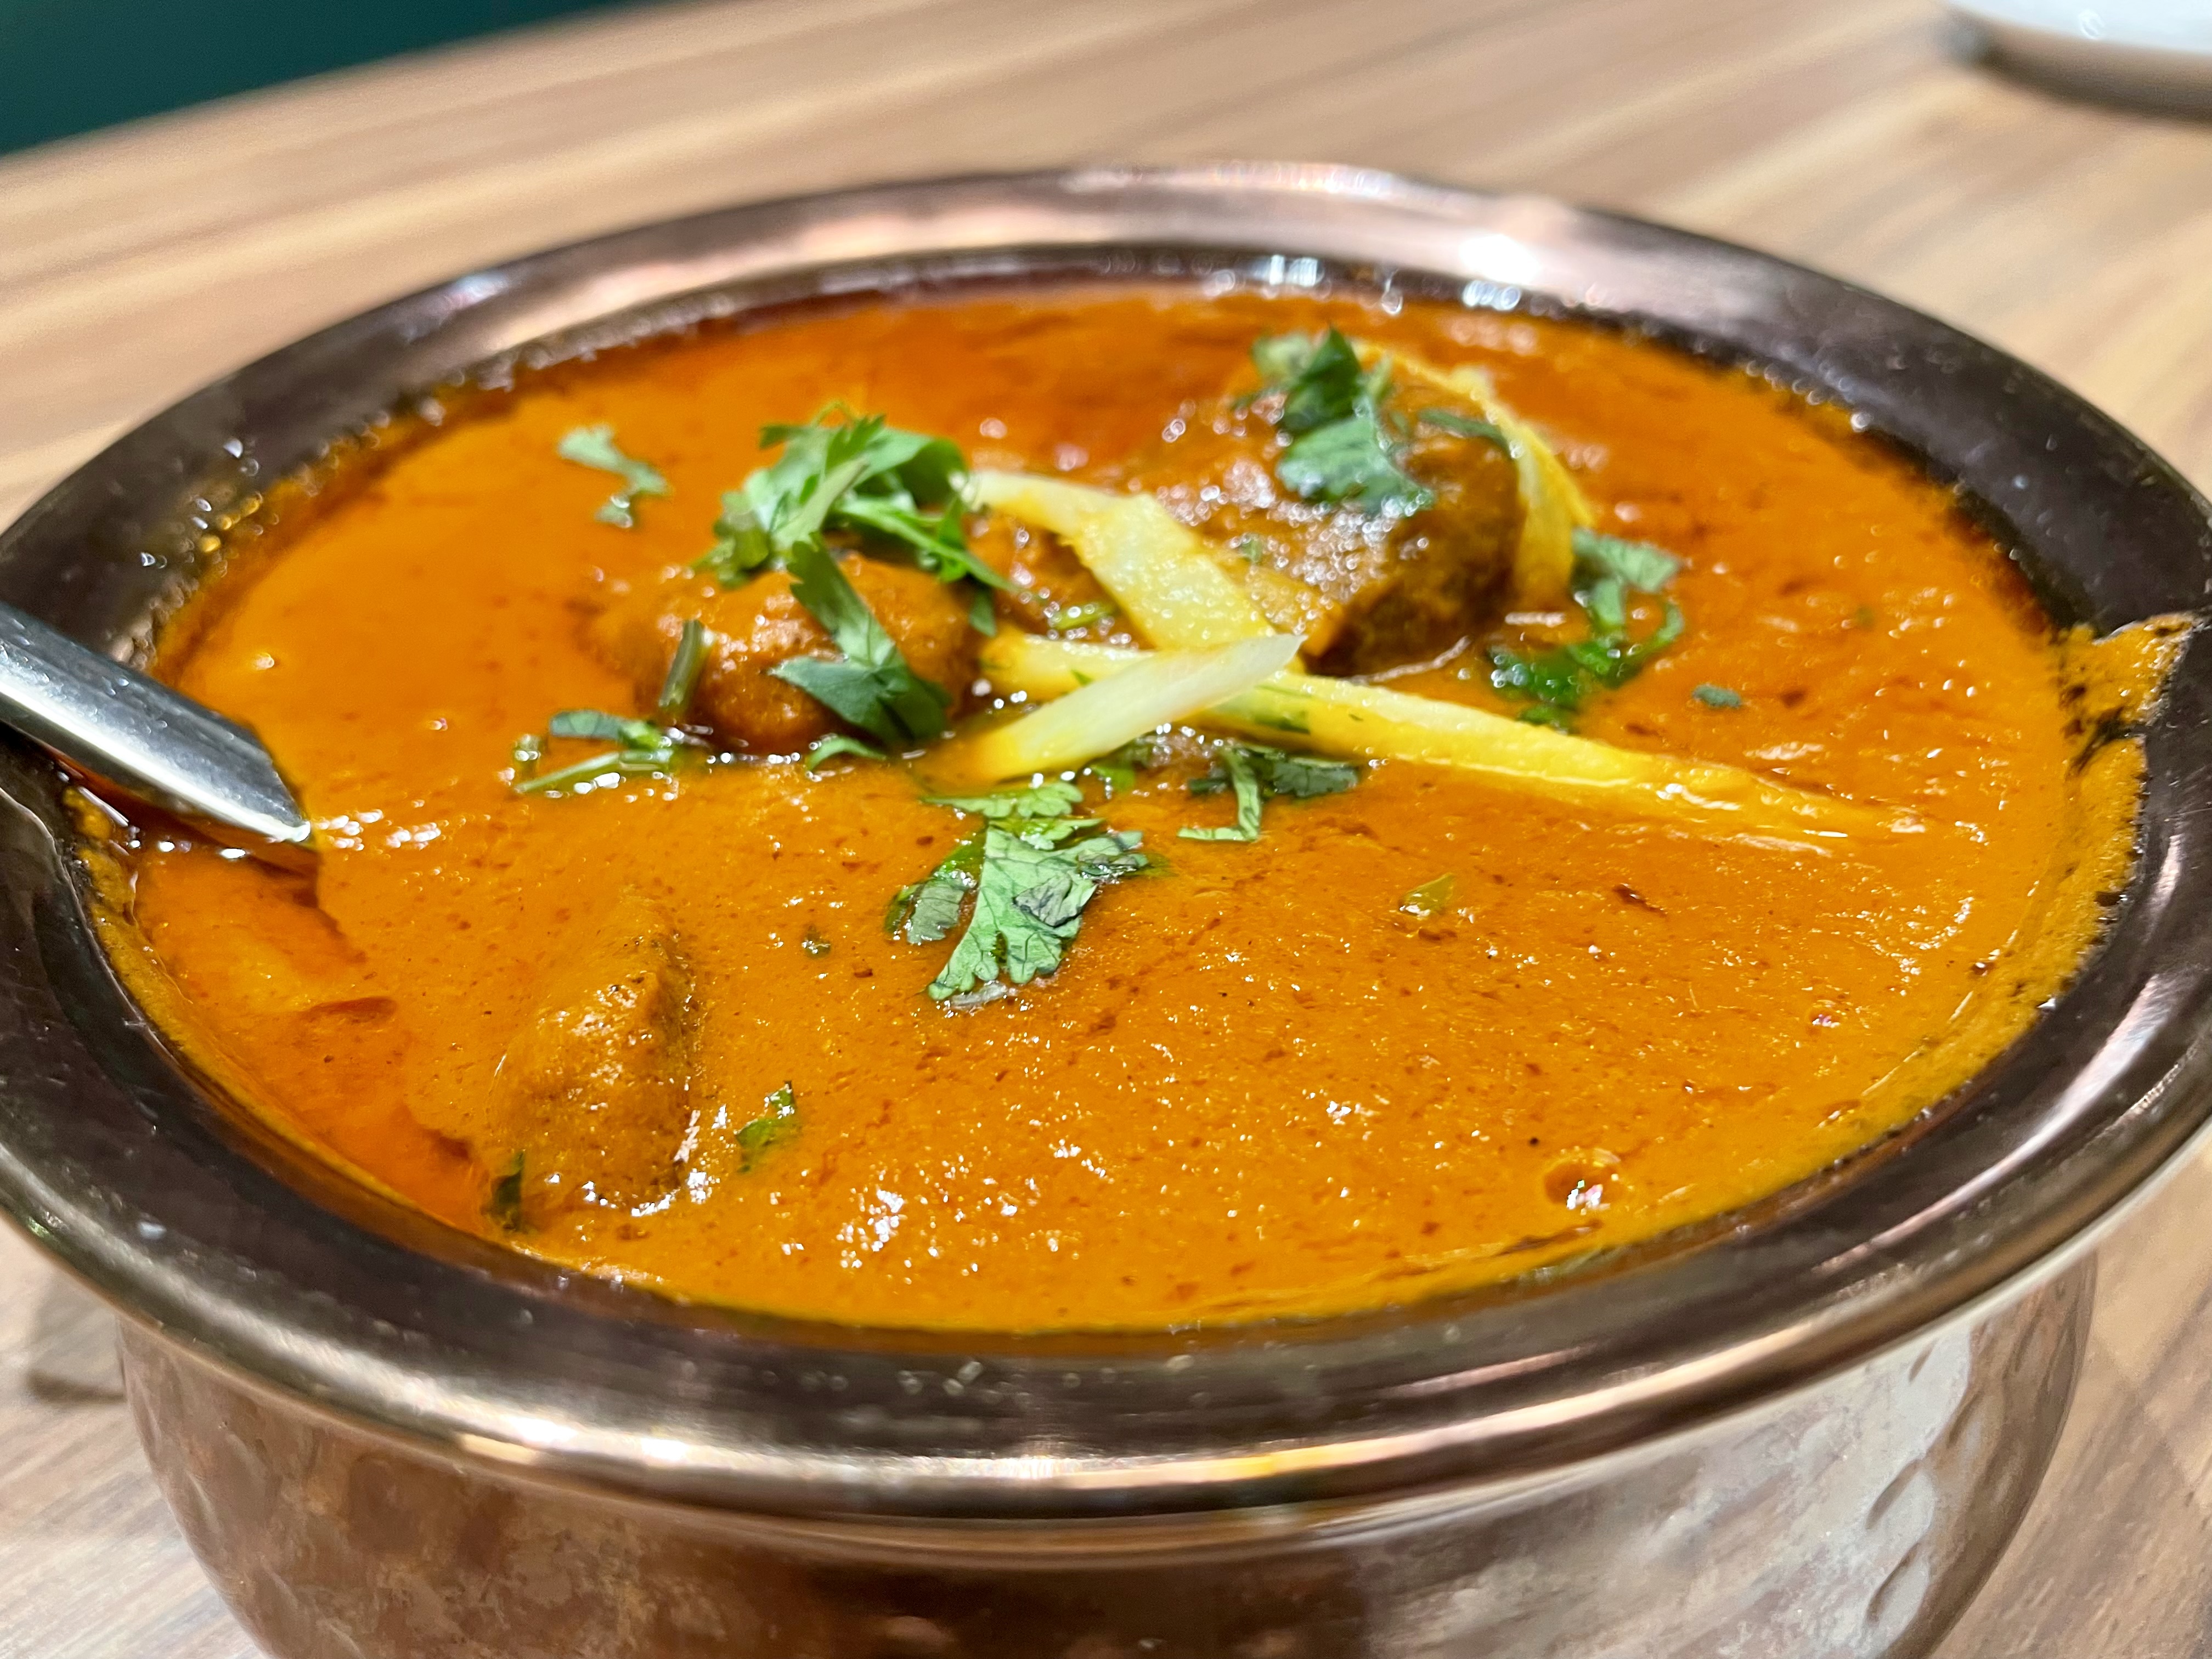 Rogan josh is a lamb curry with a heady combination of intense spices in onion tomato curry sauce